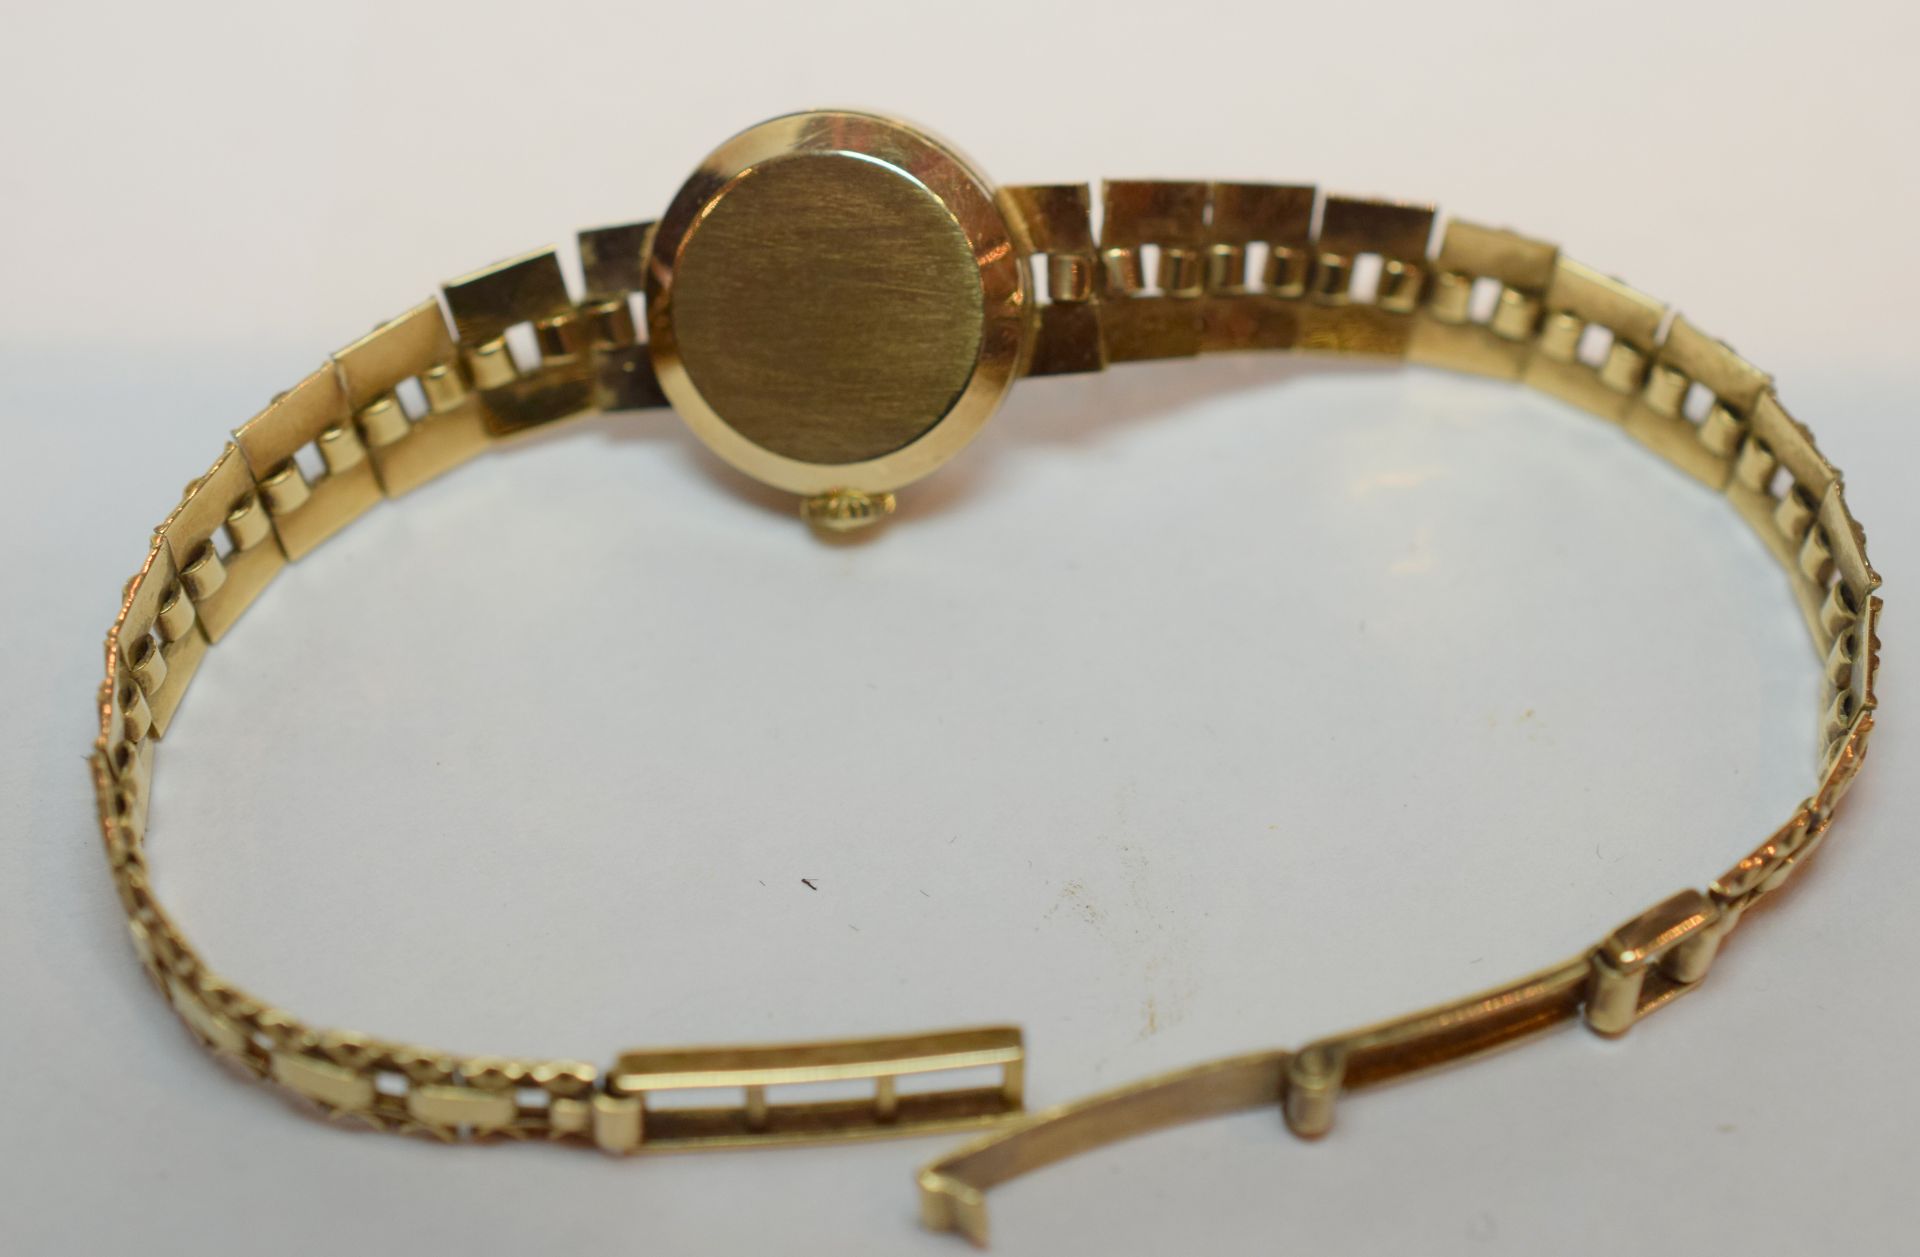 Vintage 9ct Gold Ladies Accurist Watch On 9ct Gold Bracelet - Image 4 of 4